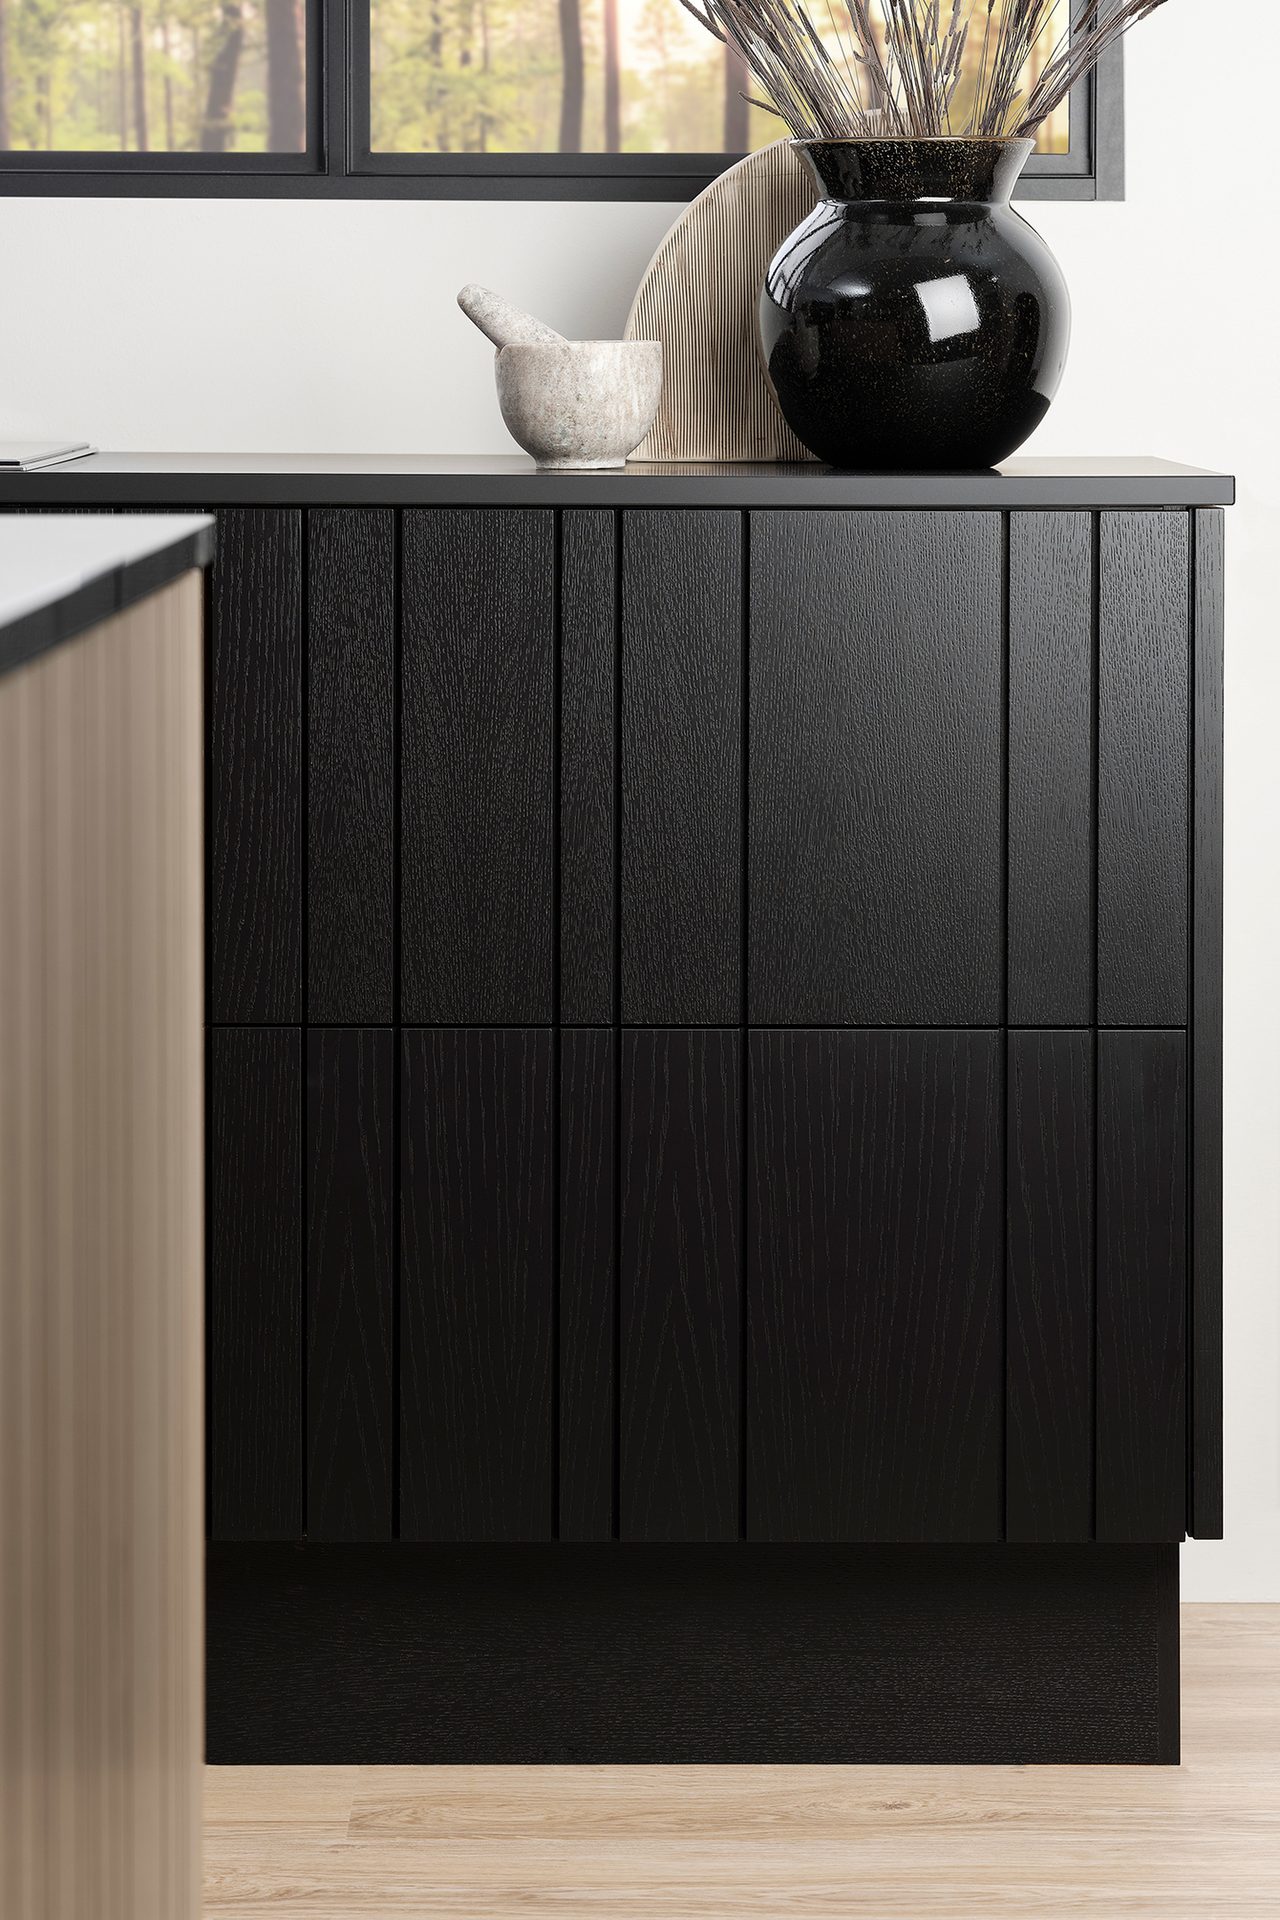 Chest of drawers, Material property, Cabinetry, Light, Product, Black, Wood, Rectangle, Grey, Window